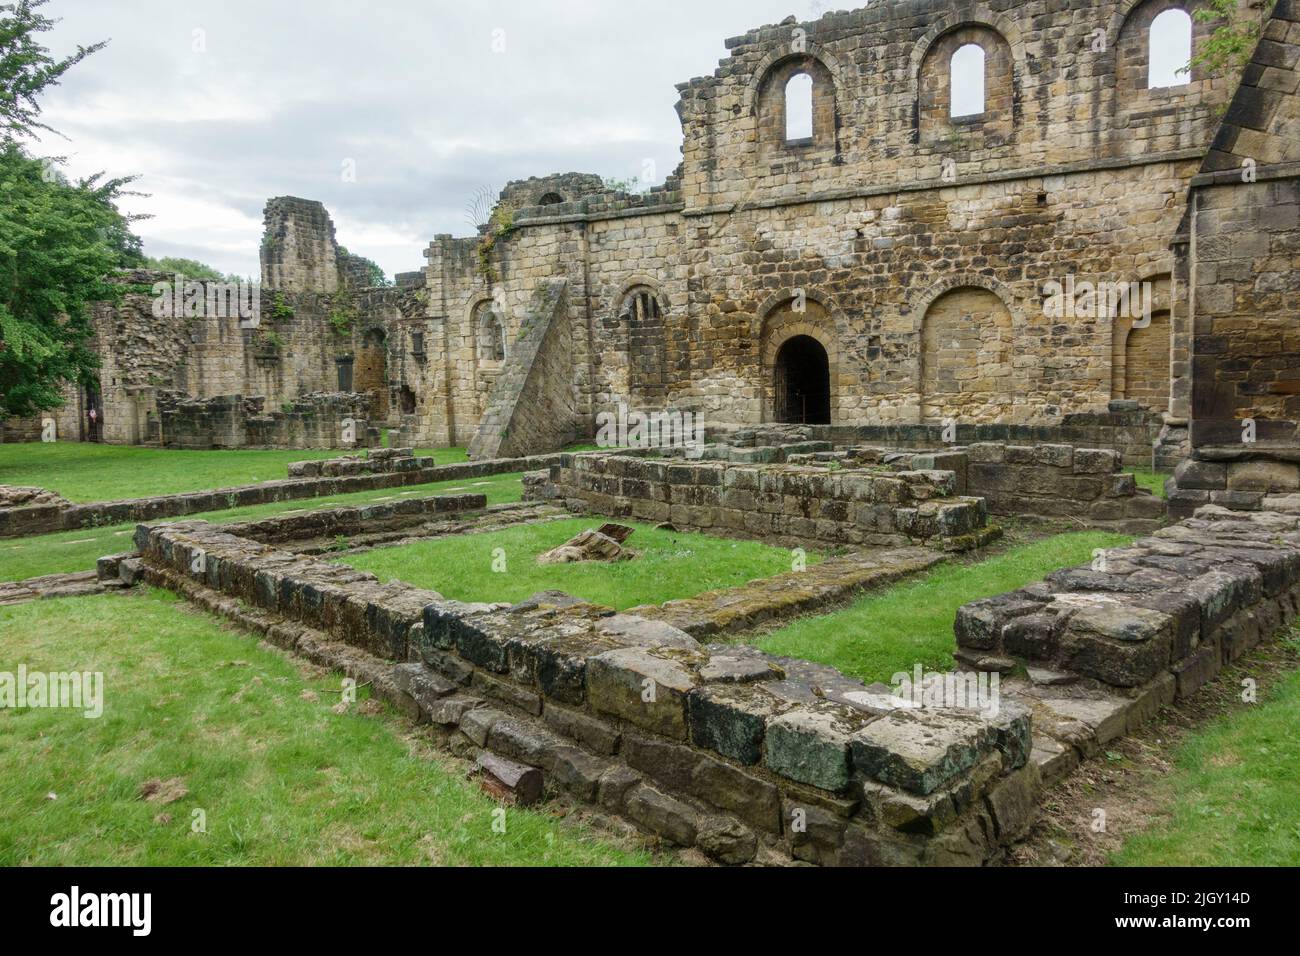 Exterior view of the grounds of Kirkstall Abbey, a ruined Cistercian monastery in Kirkstall, north-west of Leeds, West Yorkshire, England. Stock Photo